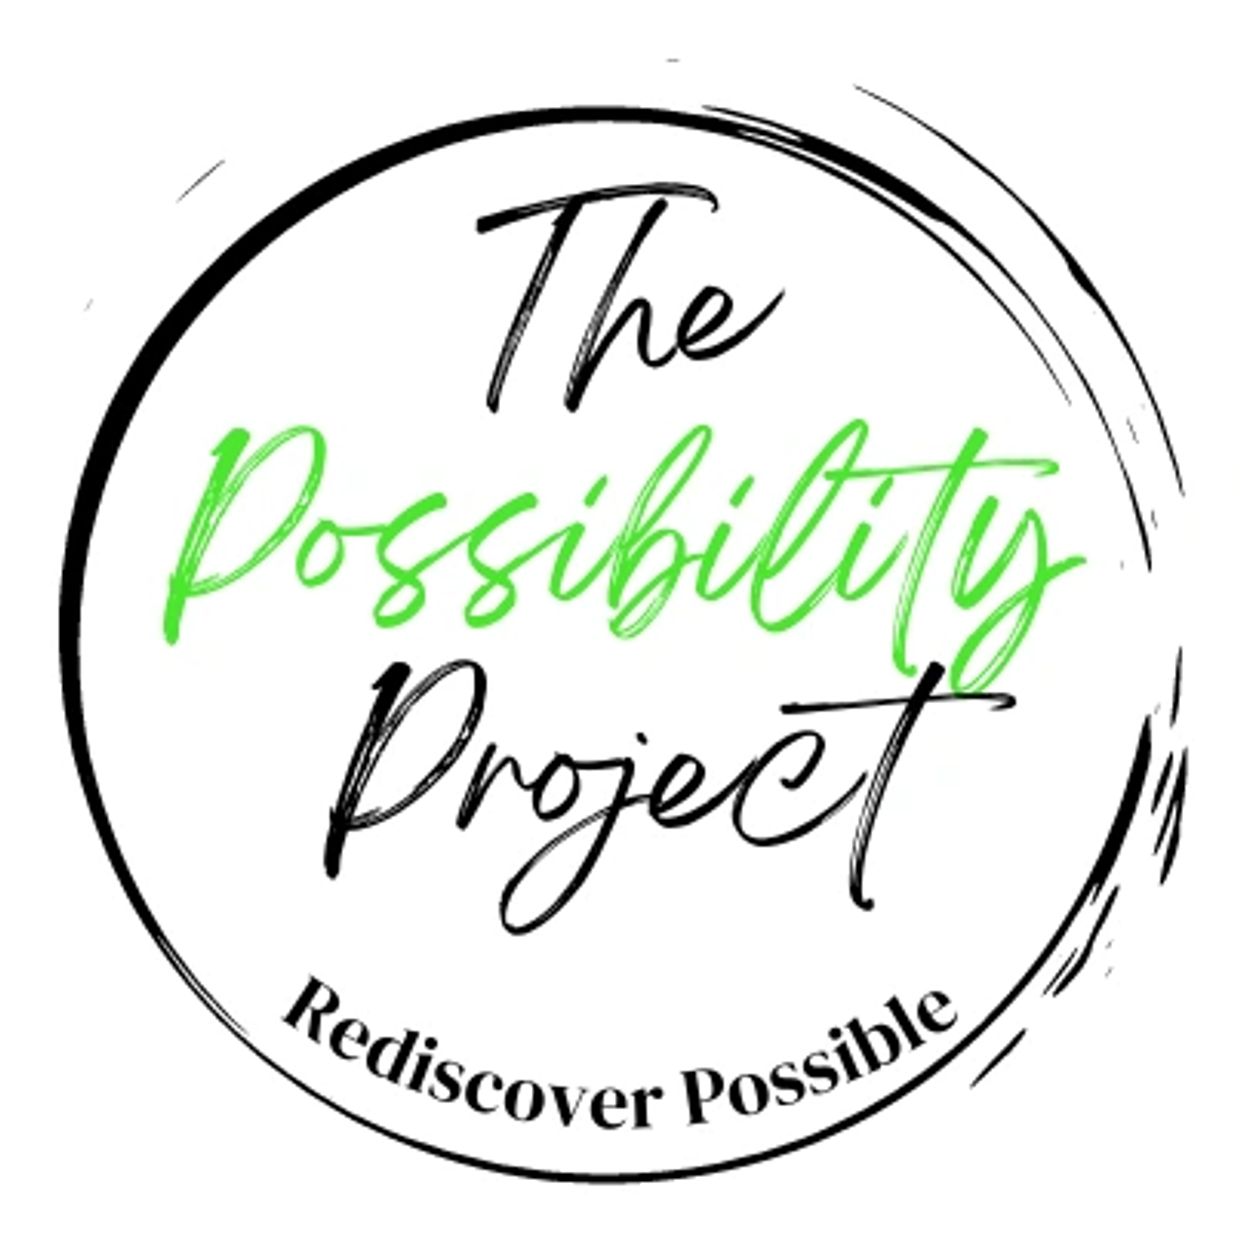 The Possibility Project logo: a black open sketch circle with green and black writing.